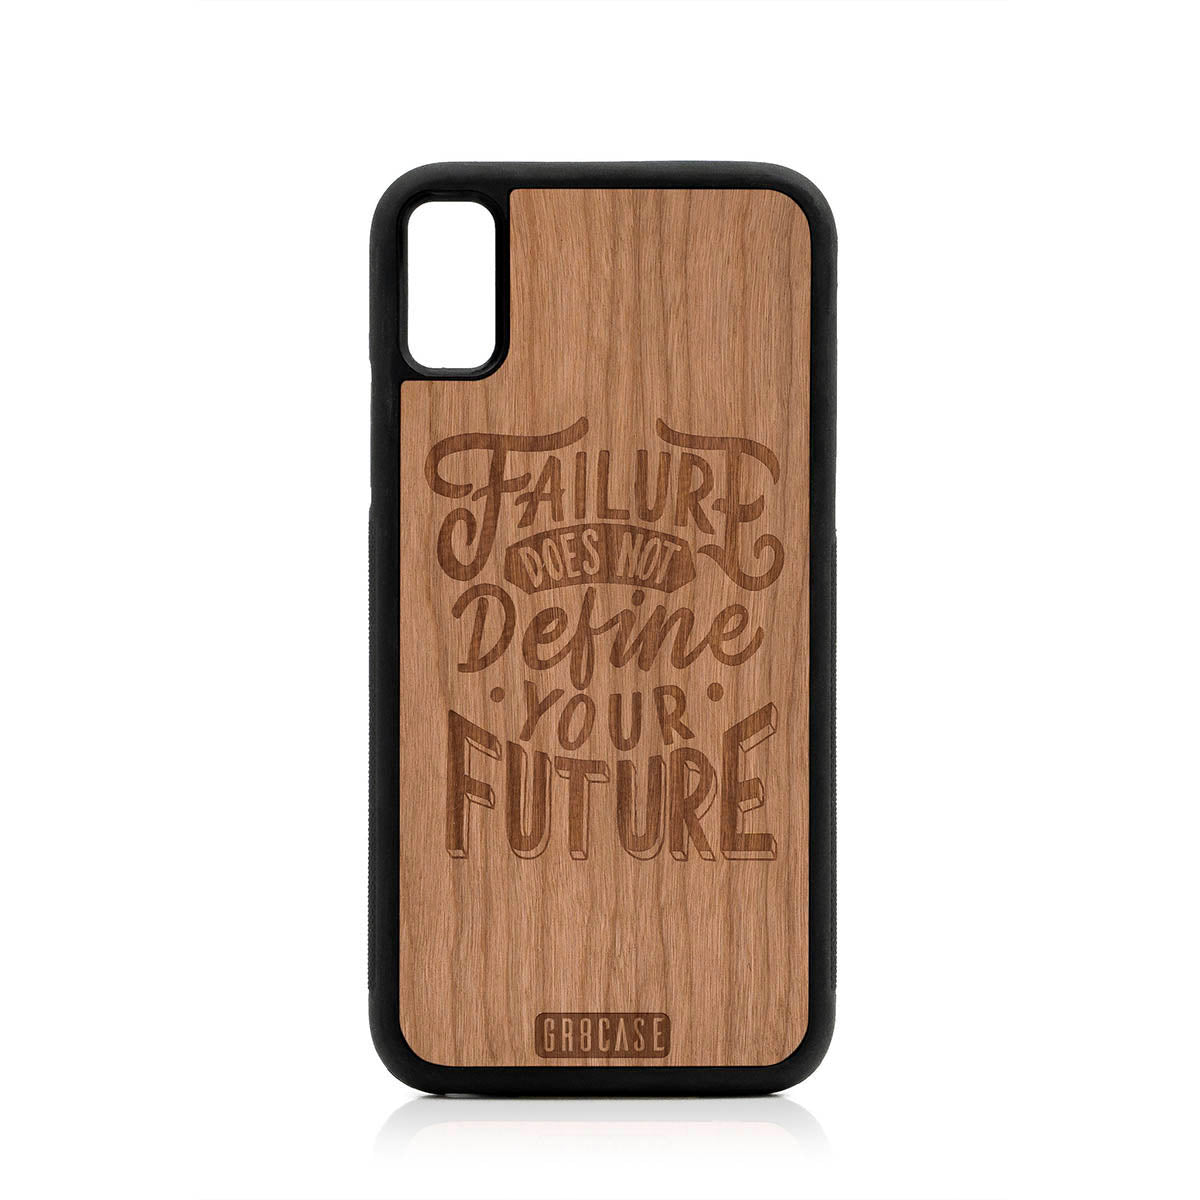 Failure Does Not Define You Future Design Wood Case For iPhone XS Max by GR8CASE